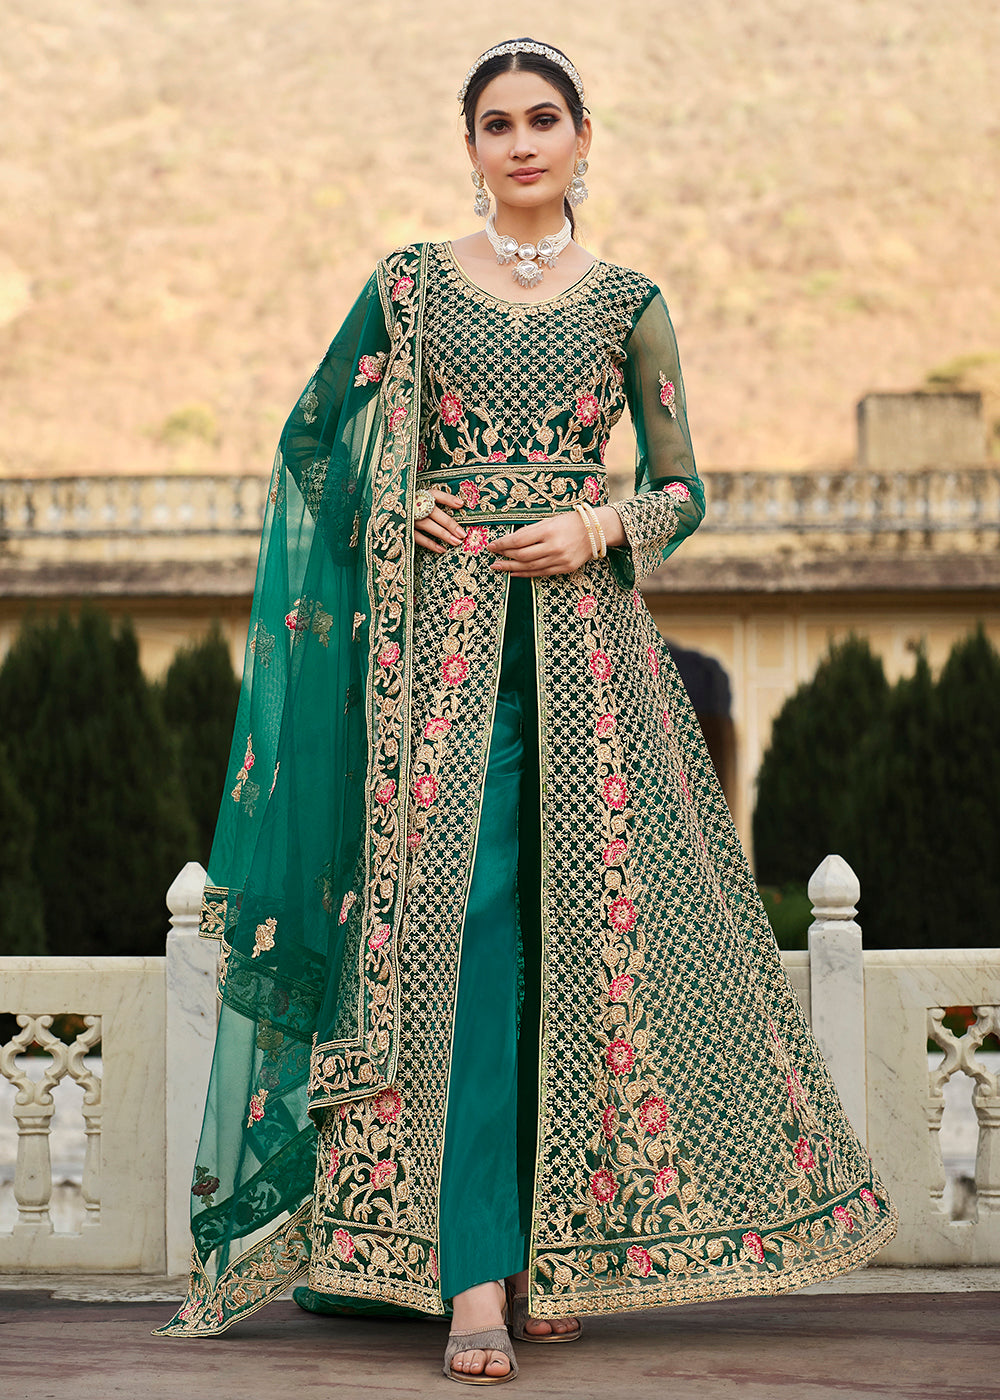 Buy Now Special Cord & Stone Work Green Slit Style Anarkali Suit Online in USA, UK, Australia, New Zealand, Canada, Italy & Worldwide at Empress Clothing. 